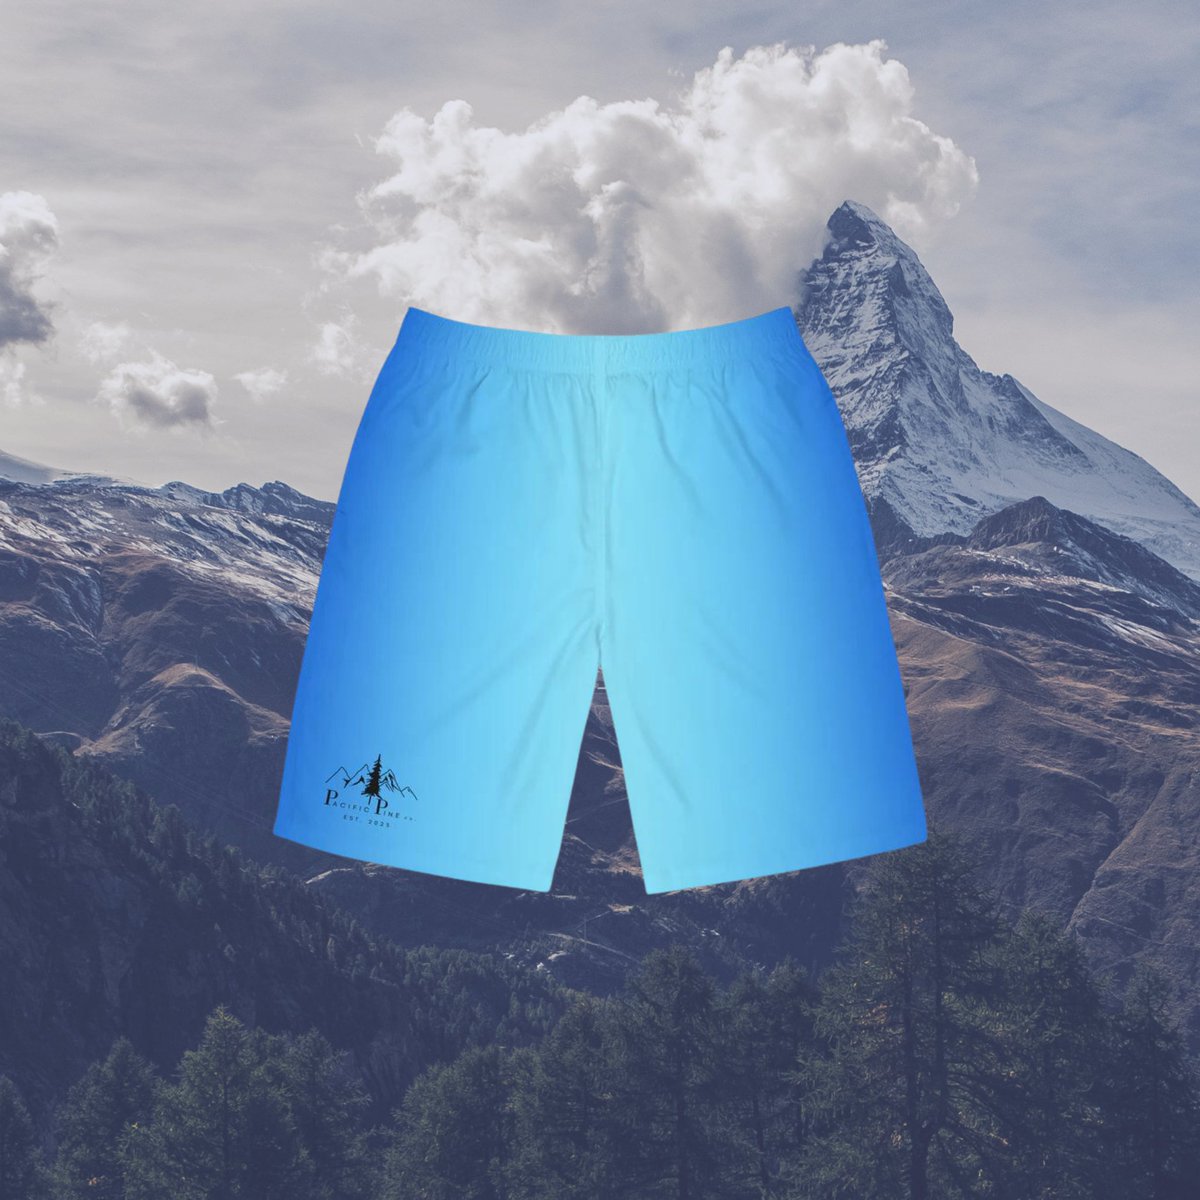 Dive into summer with our newest addition - Men's Boardshorts in Gradient Shades of Ocean Blue. 🌊 Perfect for beach days, surf sessions, or pool lounging. Embrace the #PacificPineLife.

#NewRelease #MensBoardshorts #OceanGradient #BeachWear #SurfStyle #BeachLife #SummerFashion